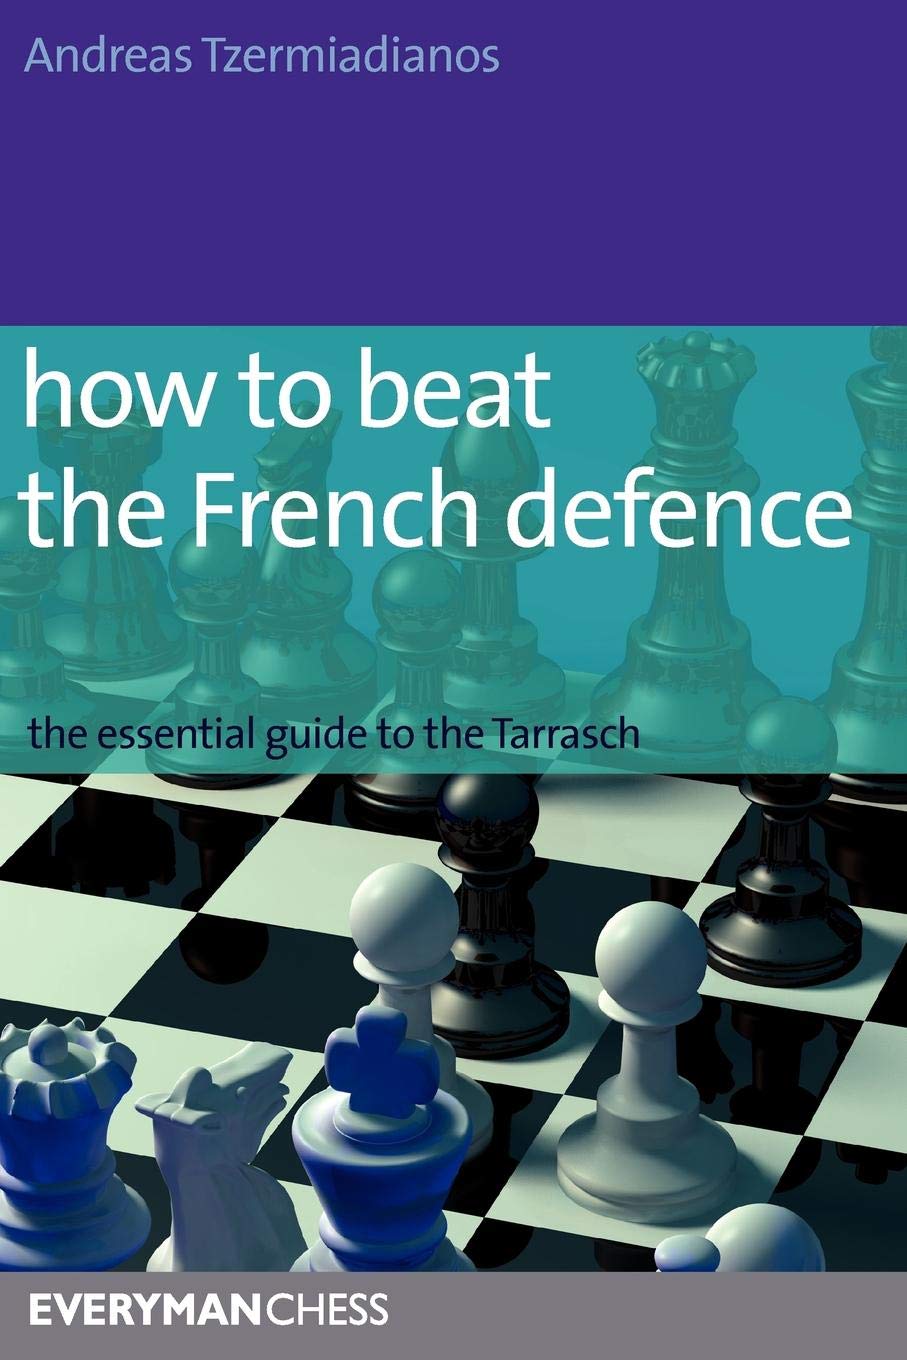 French Defense (How To Play It, How To Counter It, And It's Theory)